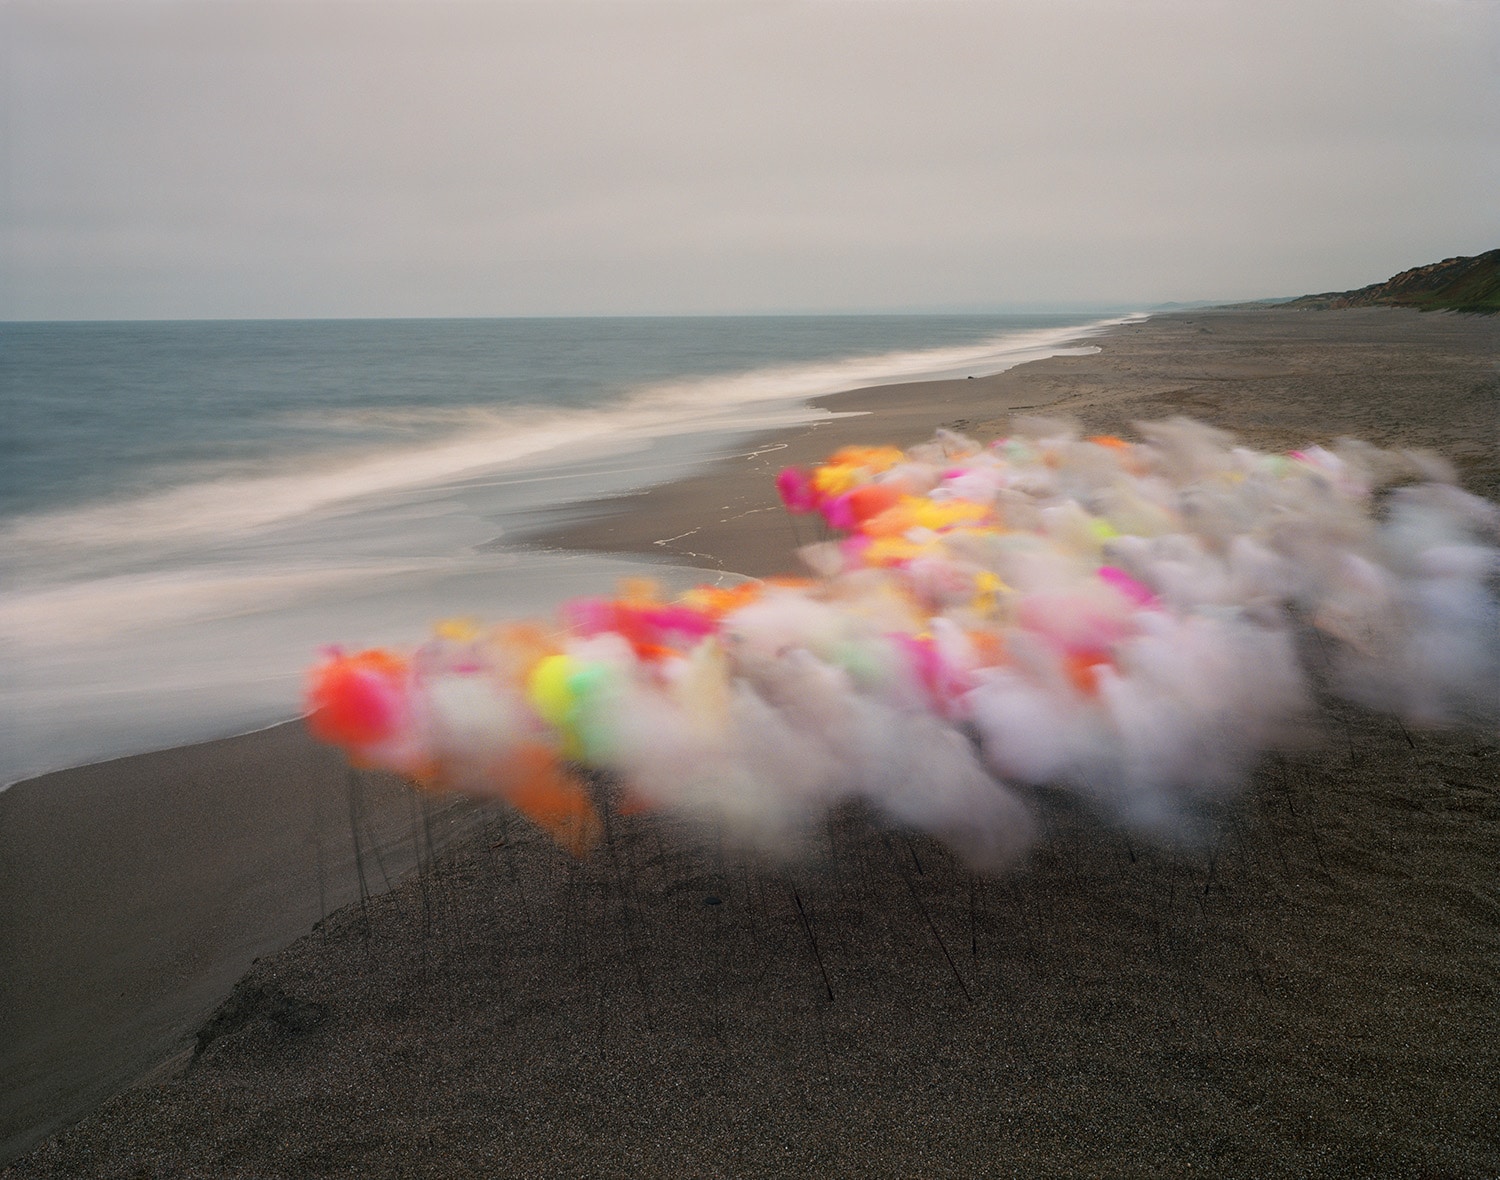 Photographs of Tulle Floating Over Landscapes by Thomas Jackson